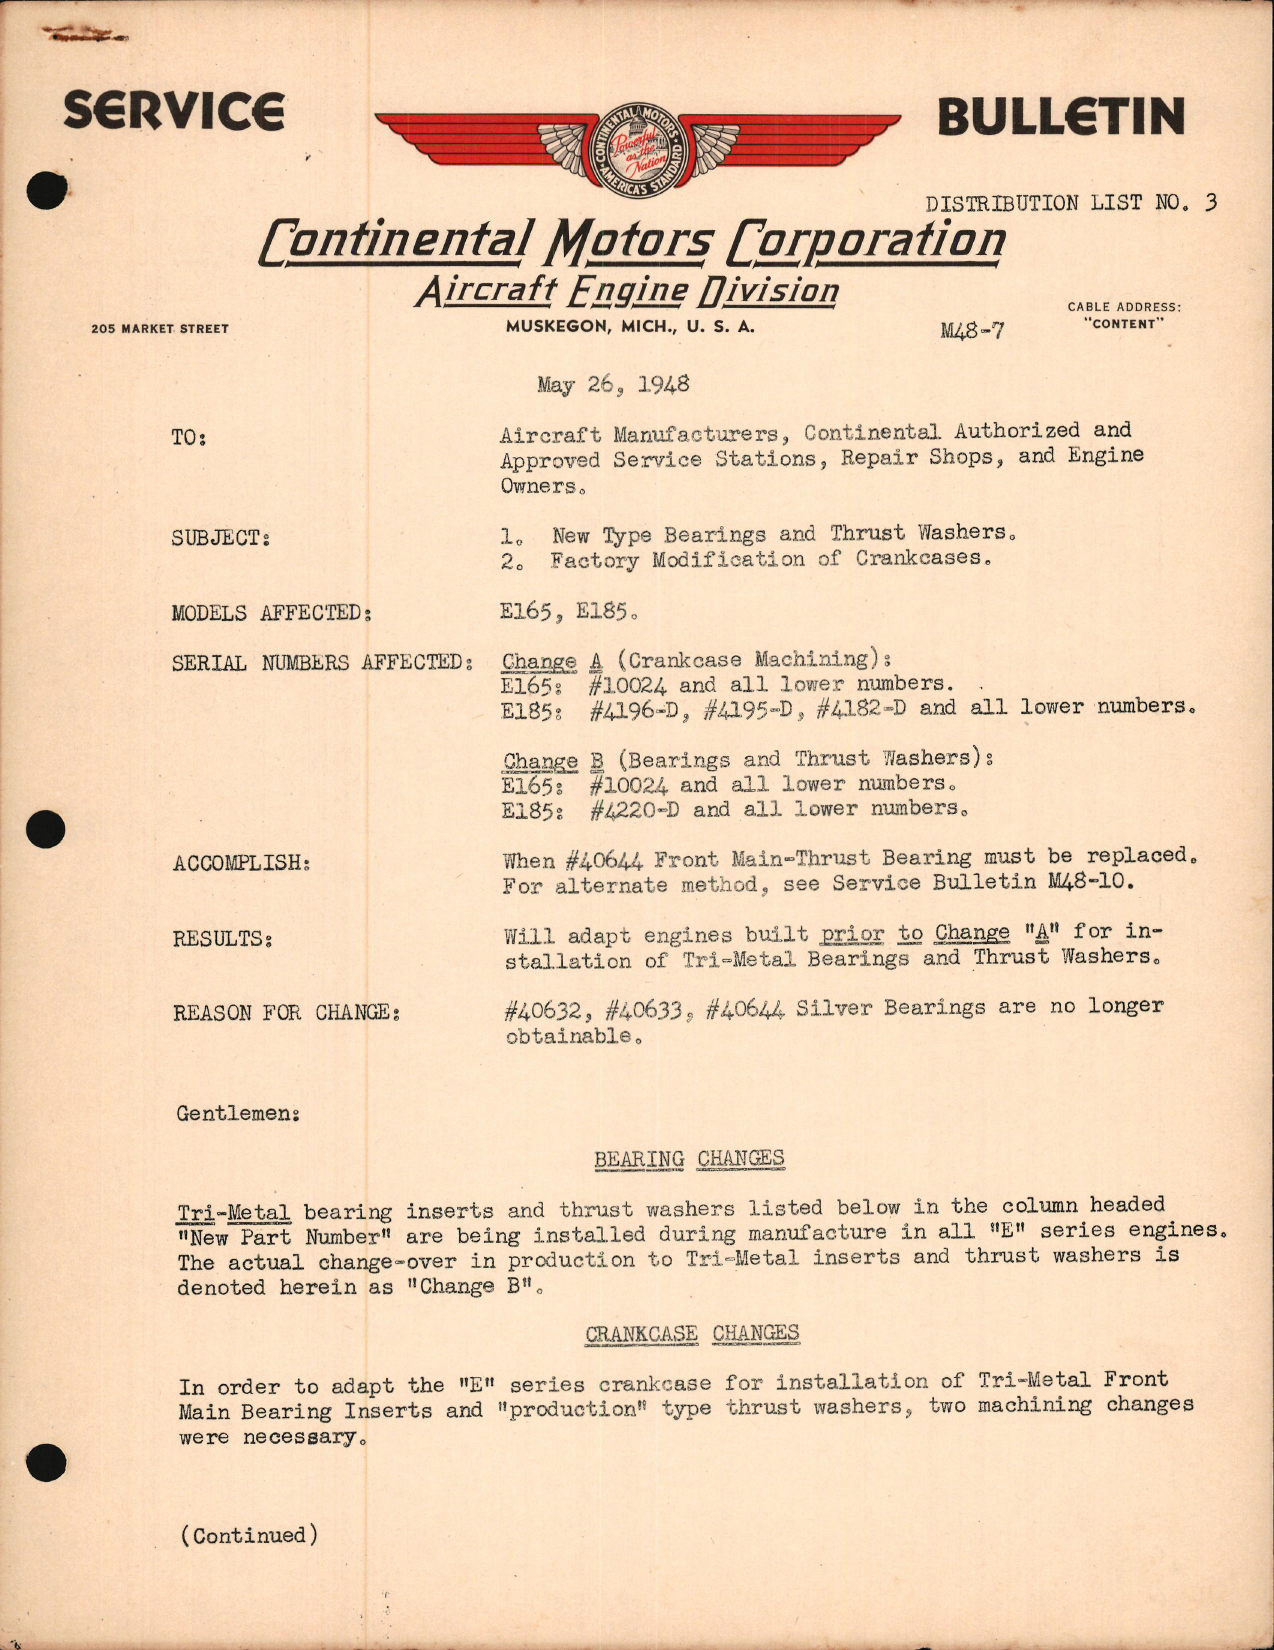 Sample page 1 from AirCorps Library document: New Type Bearings & Thrust Washers, Factory Modification of Crankcases